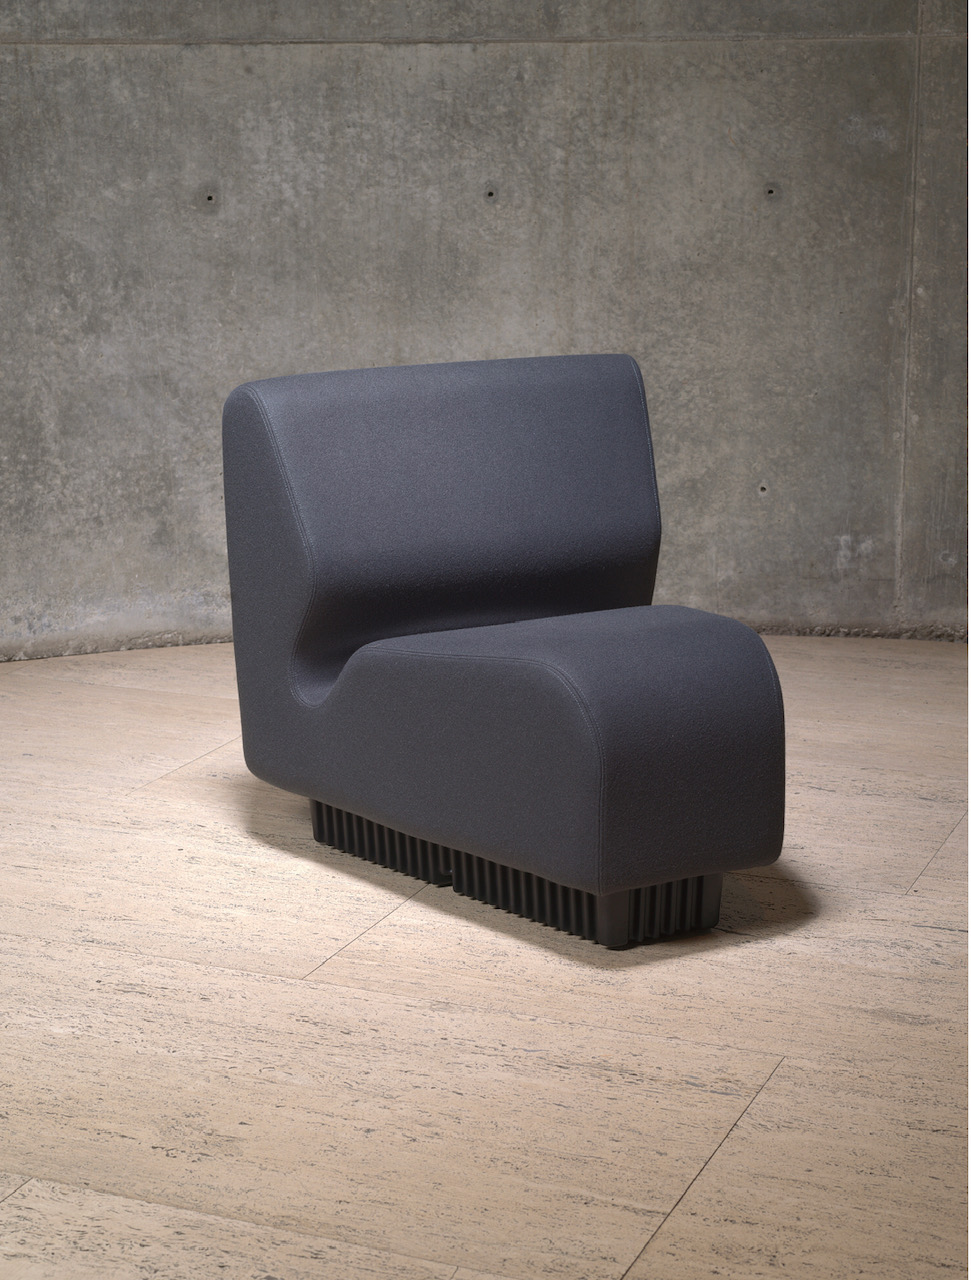 Don Chadwick, Modular seating for Herman Miller, 1974, reissued in 2015 (single seat shown here), British Wool, foam, plastic, 28″ H x 27″ W x 30″ D, Yale Center for British Art, photo by Richard Caspole 